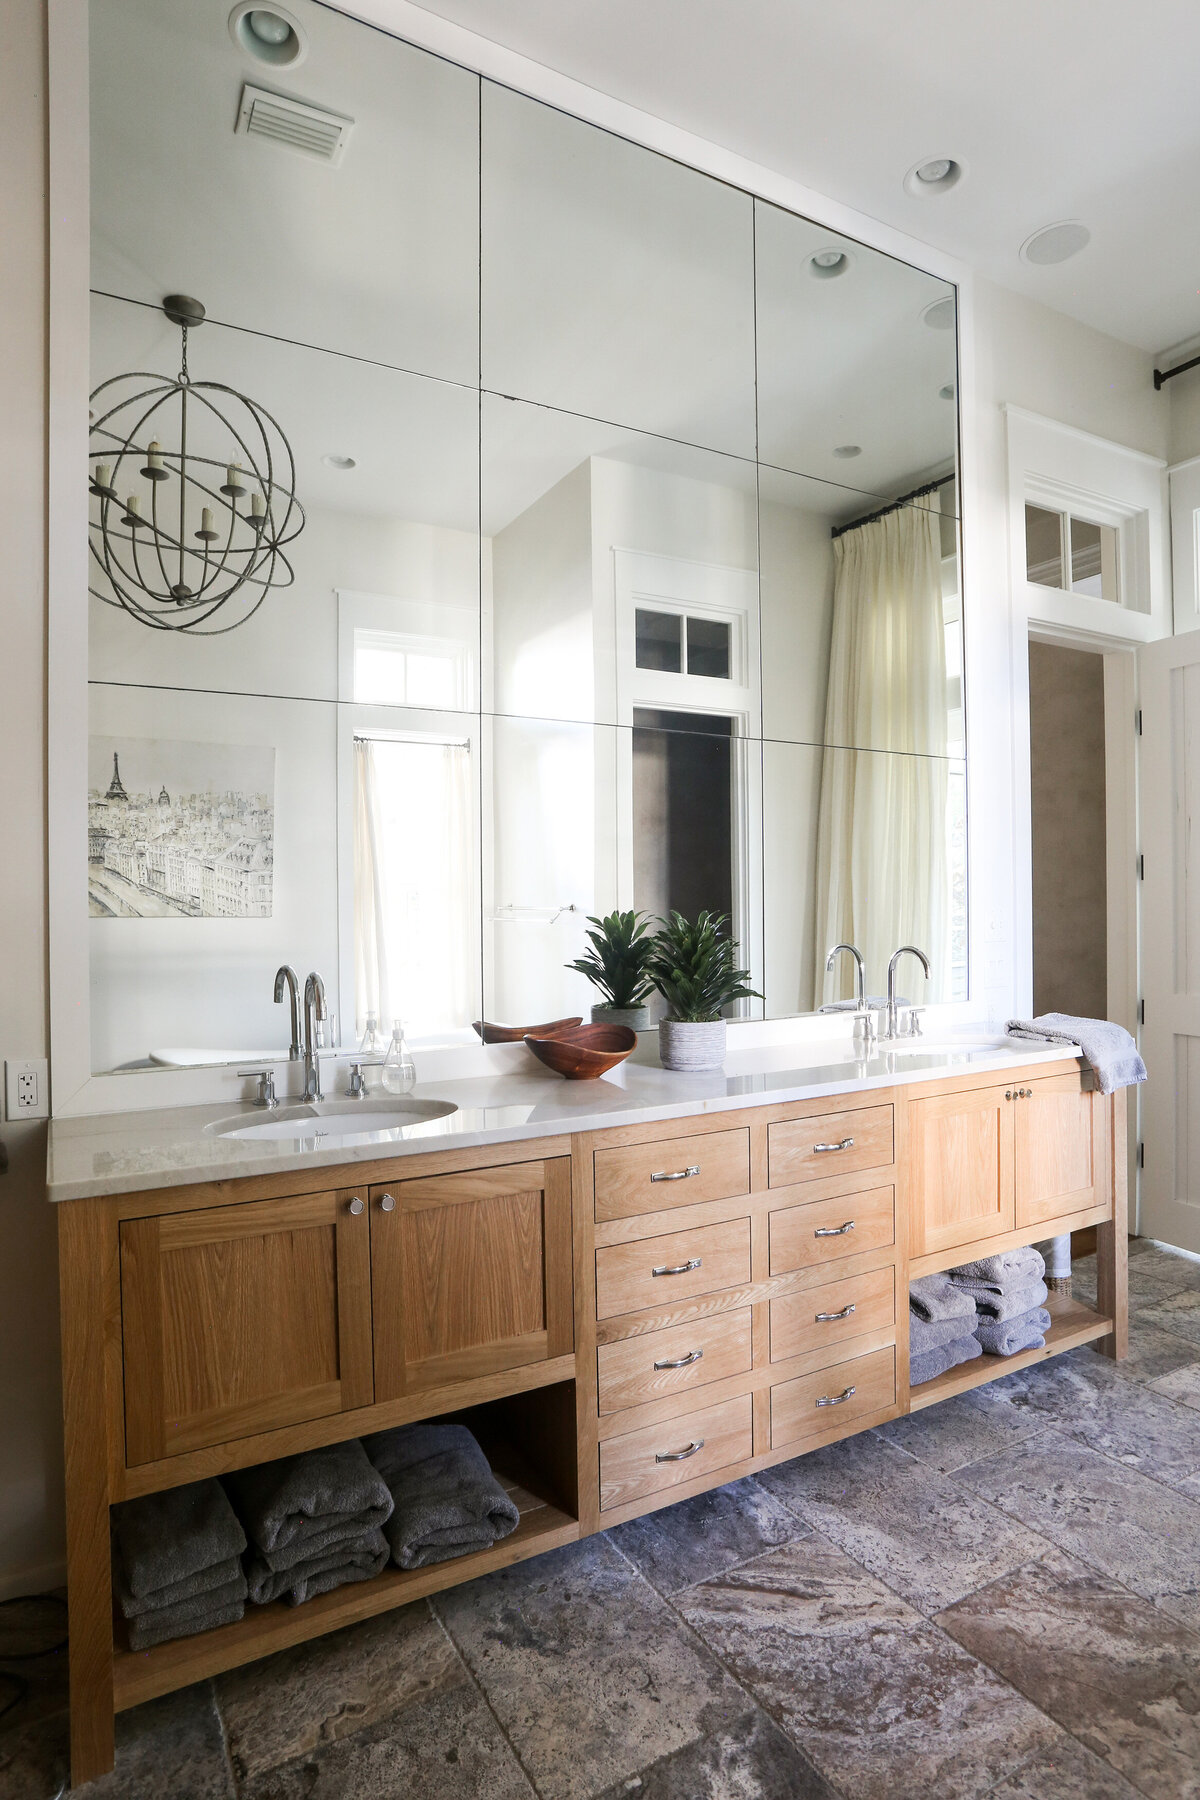 large-bath-vanity-mirrored-wall-tall-ceiling